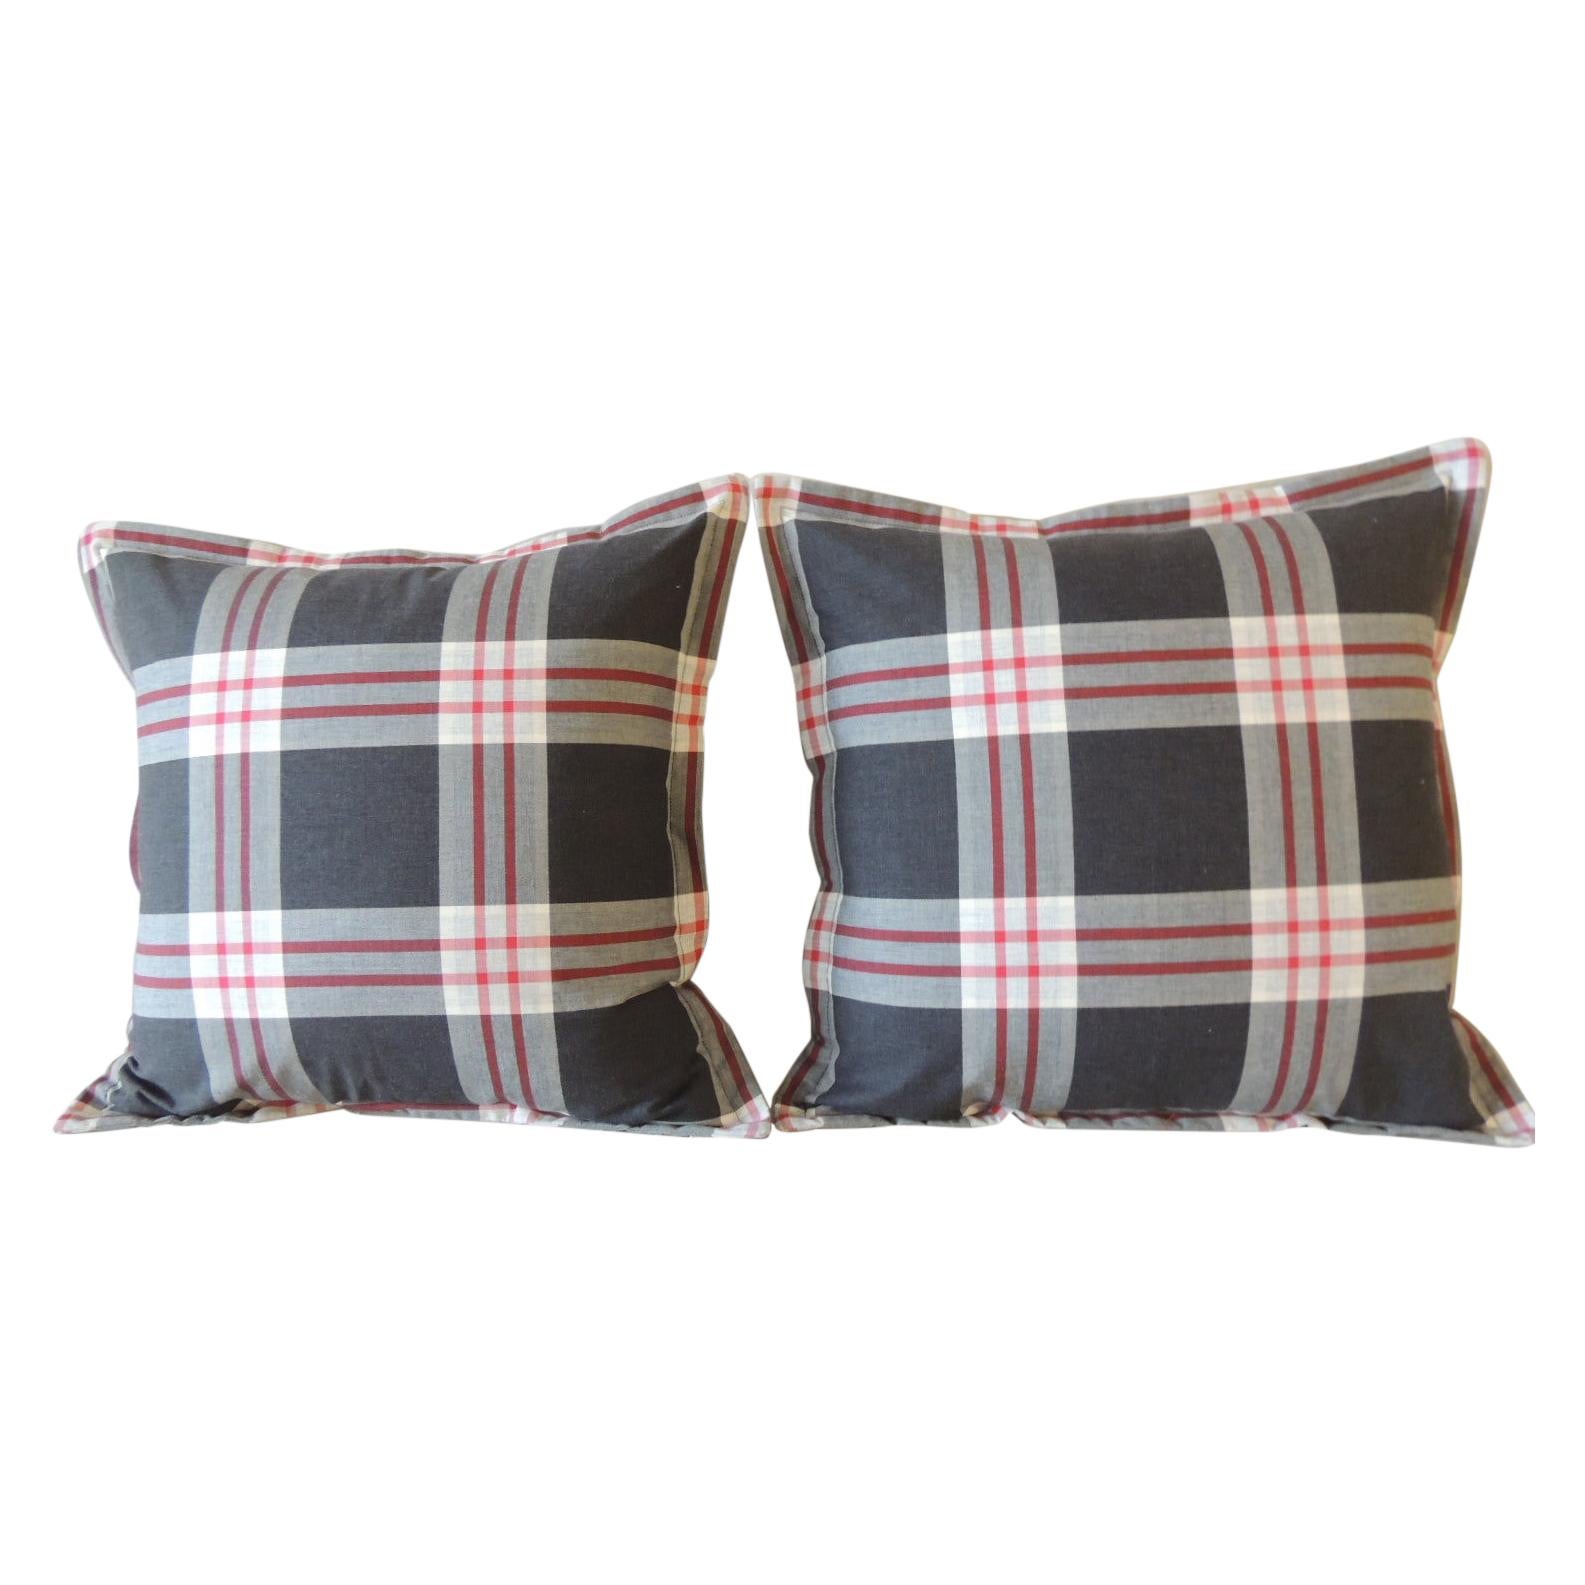 Pair of Modern Black and White Cotton Plaid Square Decorative Pillows